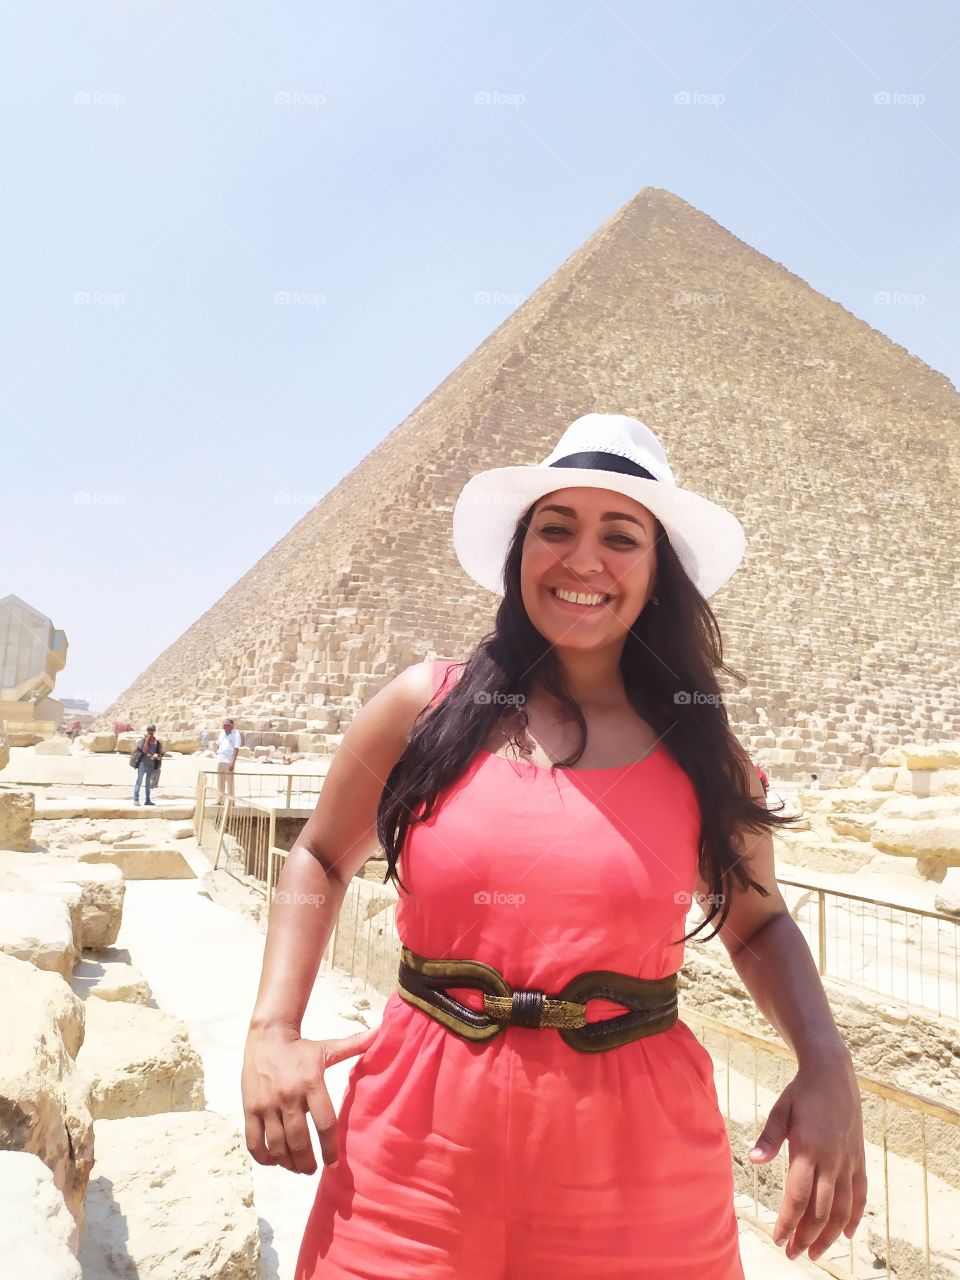 lovely photo with background panorama great pyramid more attractive photo very beautiful.